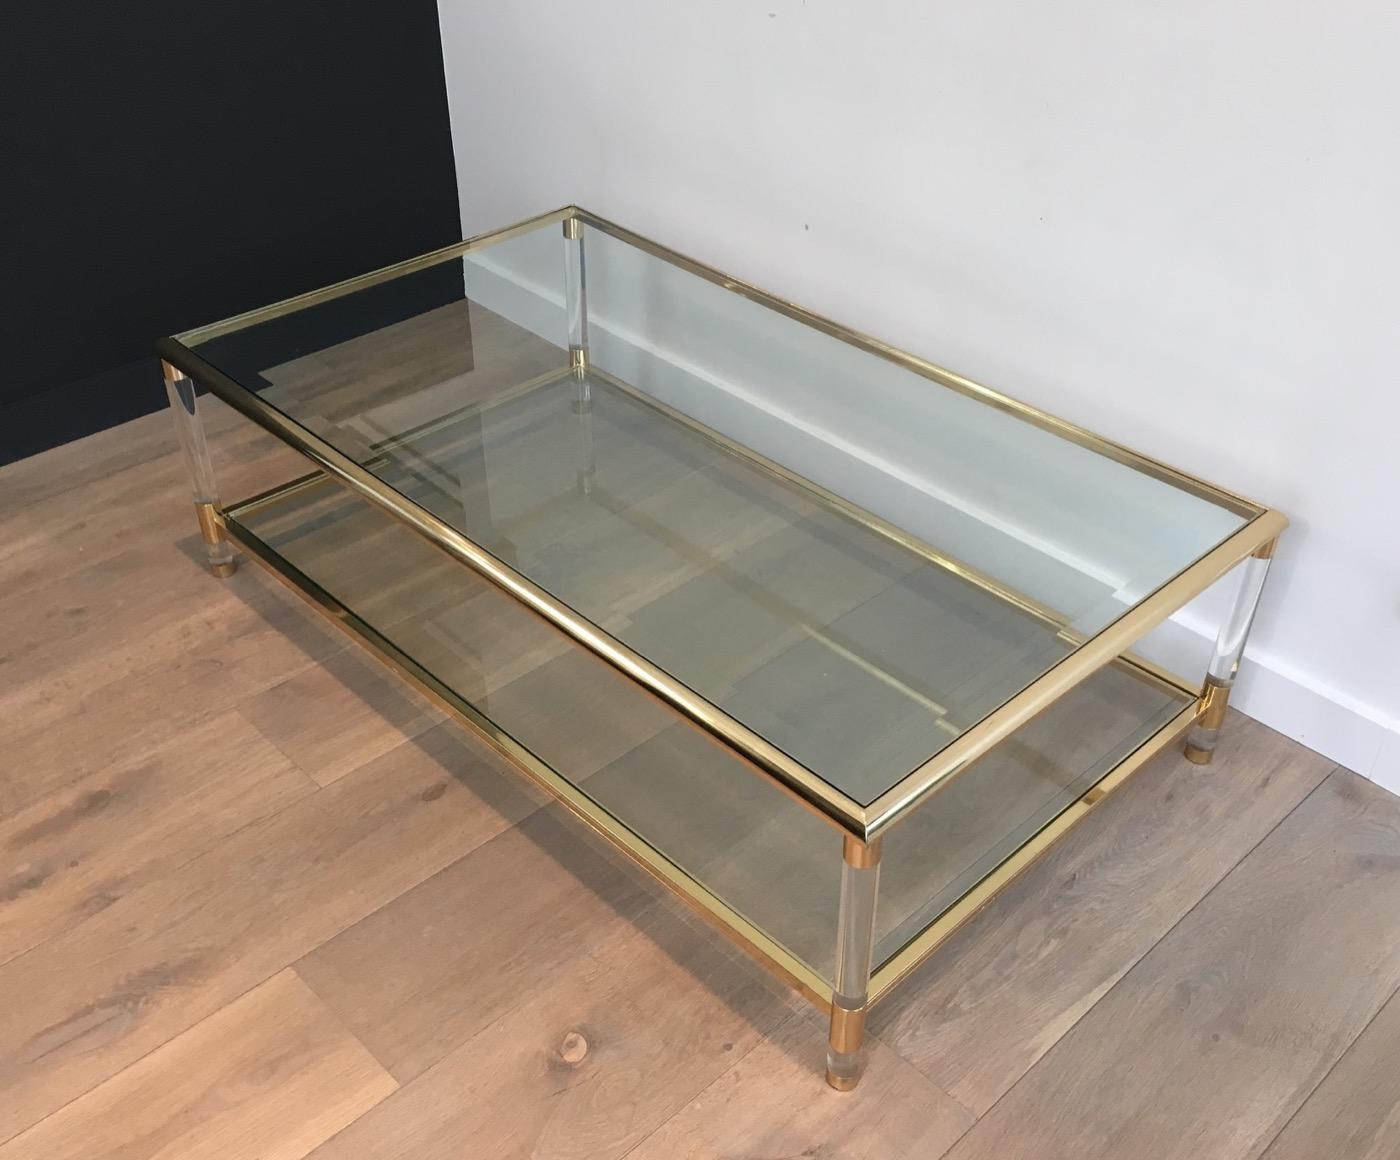 Gilt Large Gild on Nickel and Lucite Coffee Table, French, circa 1970